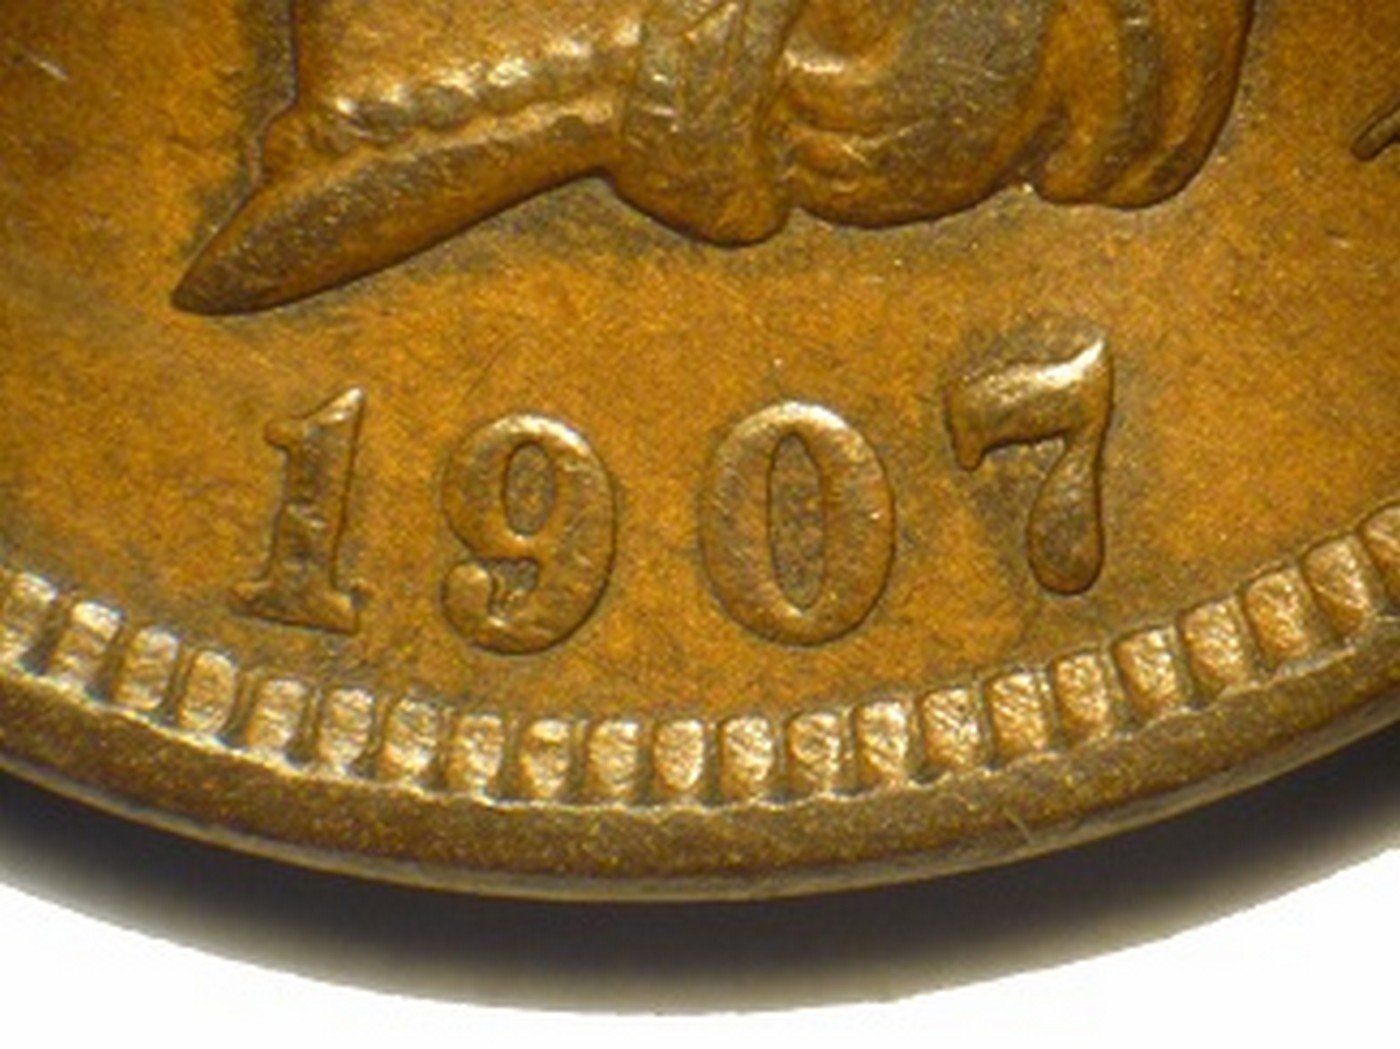 1907 RPD-045 - Indian Head Penny - Photo by David Poliquin